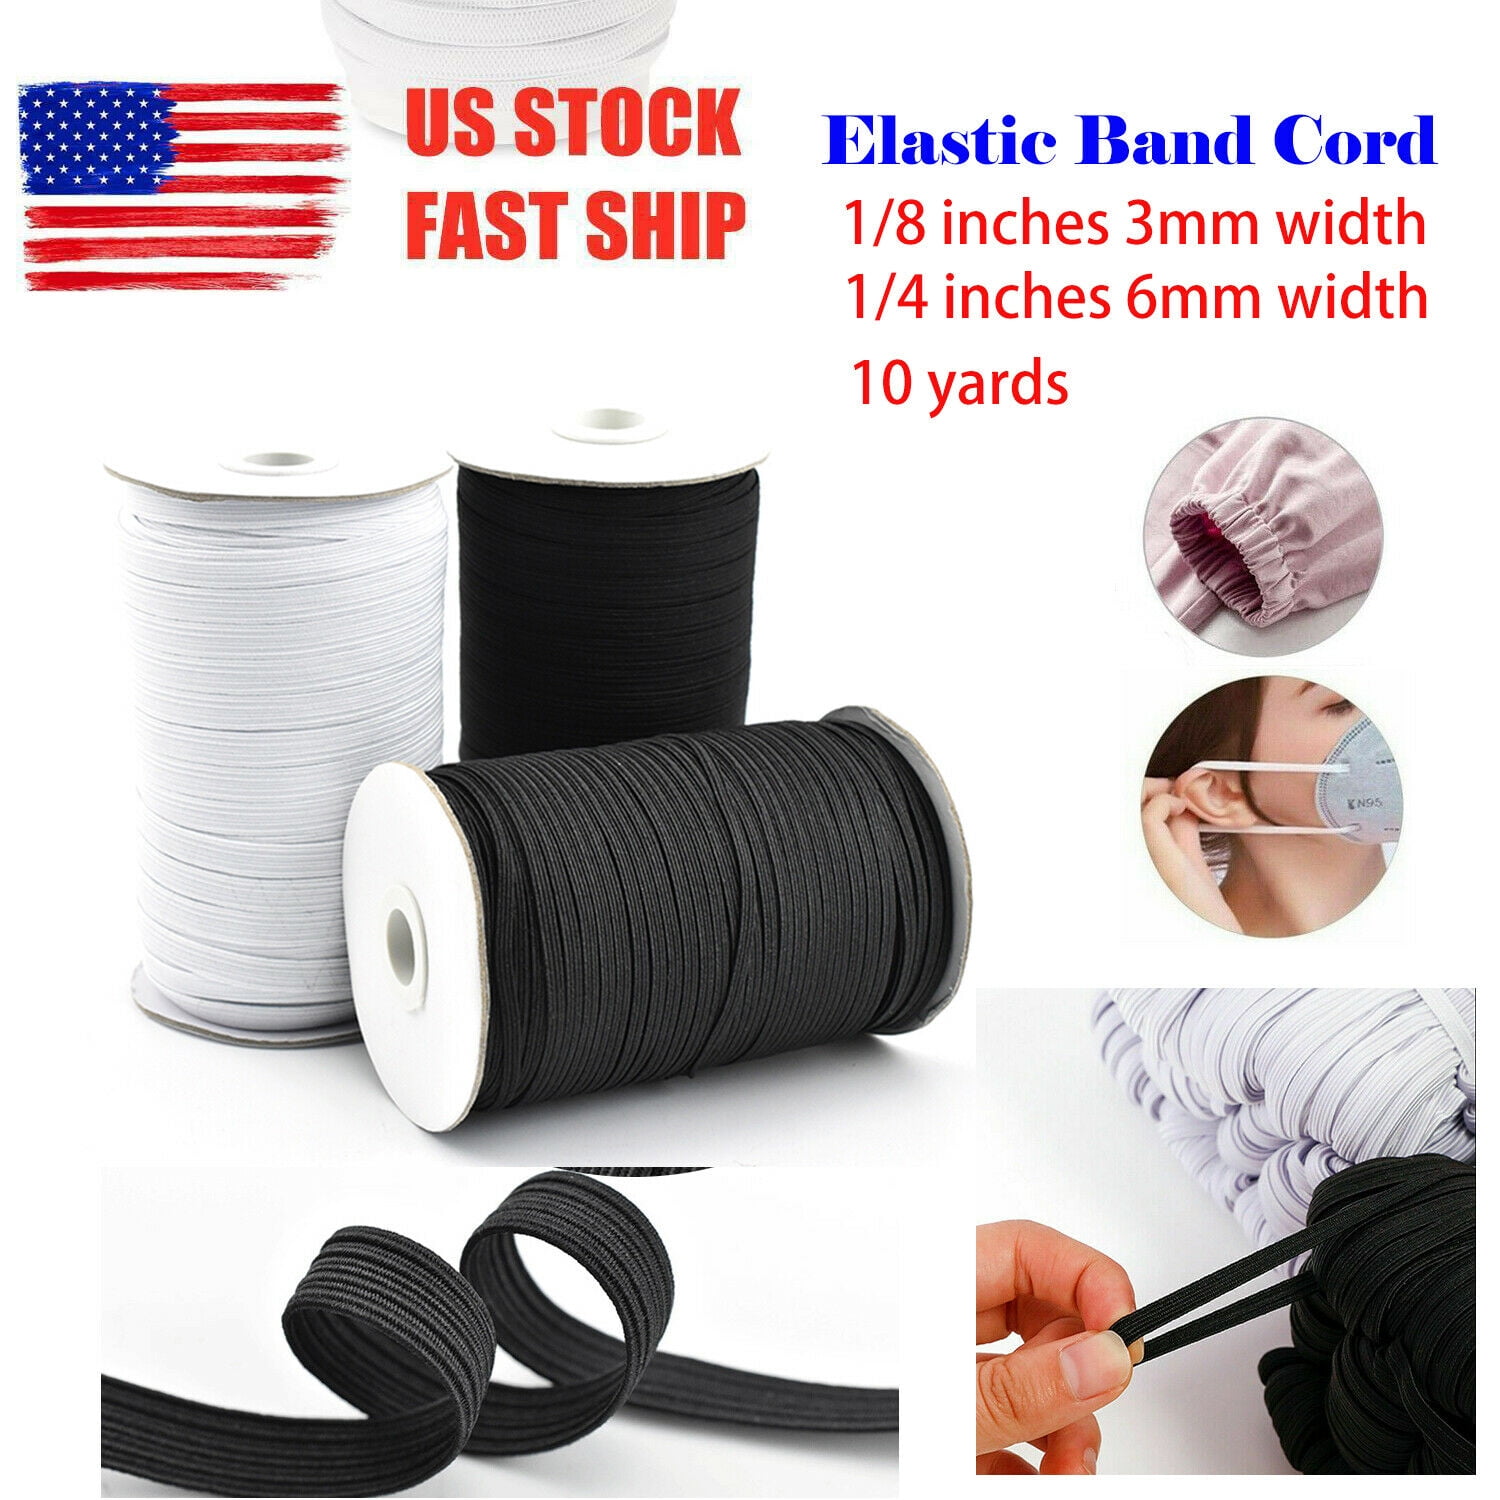 Heavy Stretch Knit Braided Elastic Band for Sewing Crafts DIY Jewelry Making Bedspread Cuff White Braided Elastic Band for Sewing 200 Yards 1/4 Inch Elastic Cord/Elastic Rope 